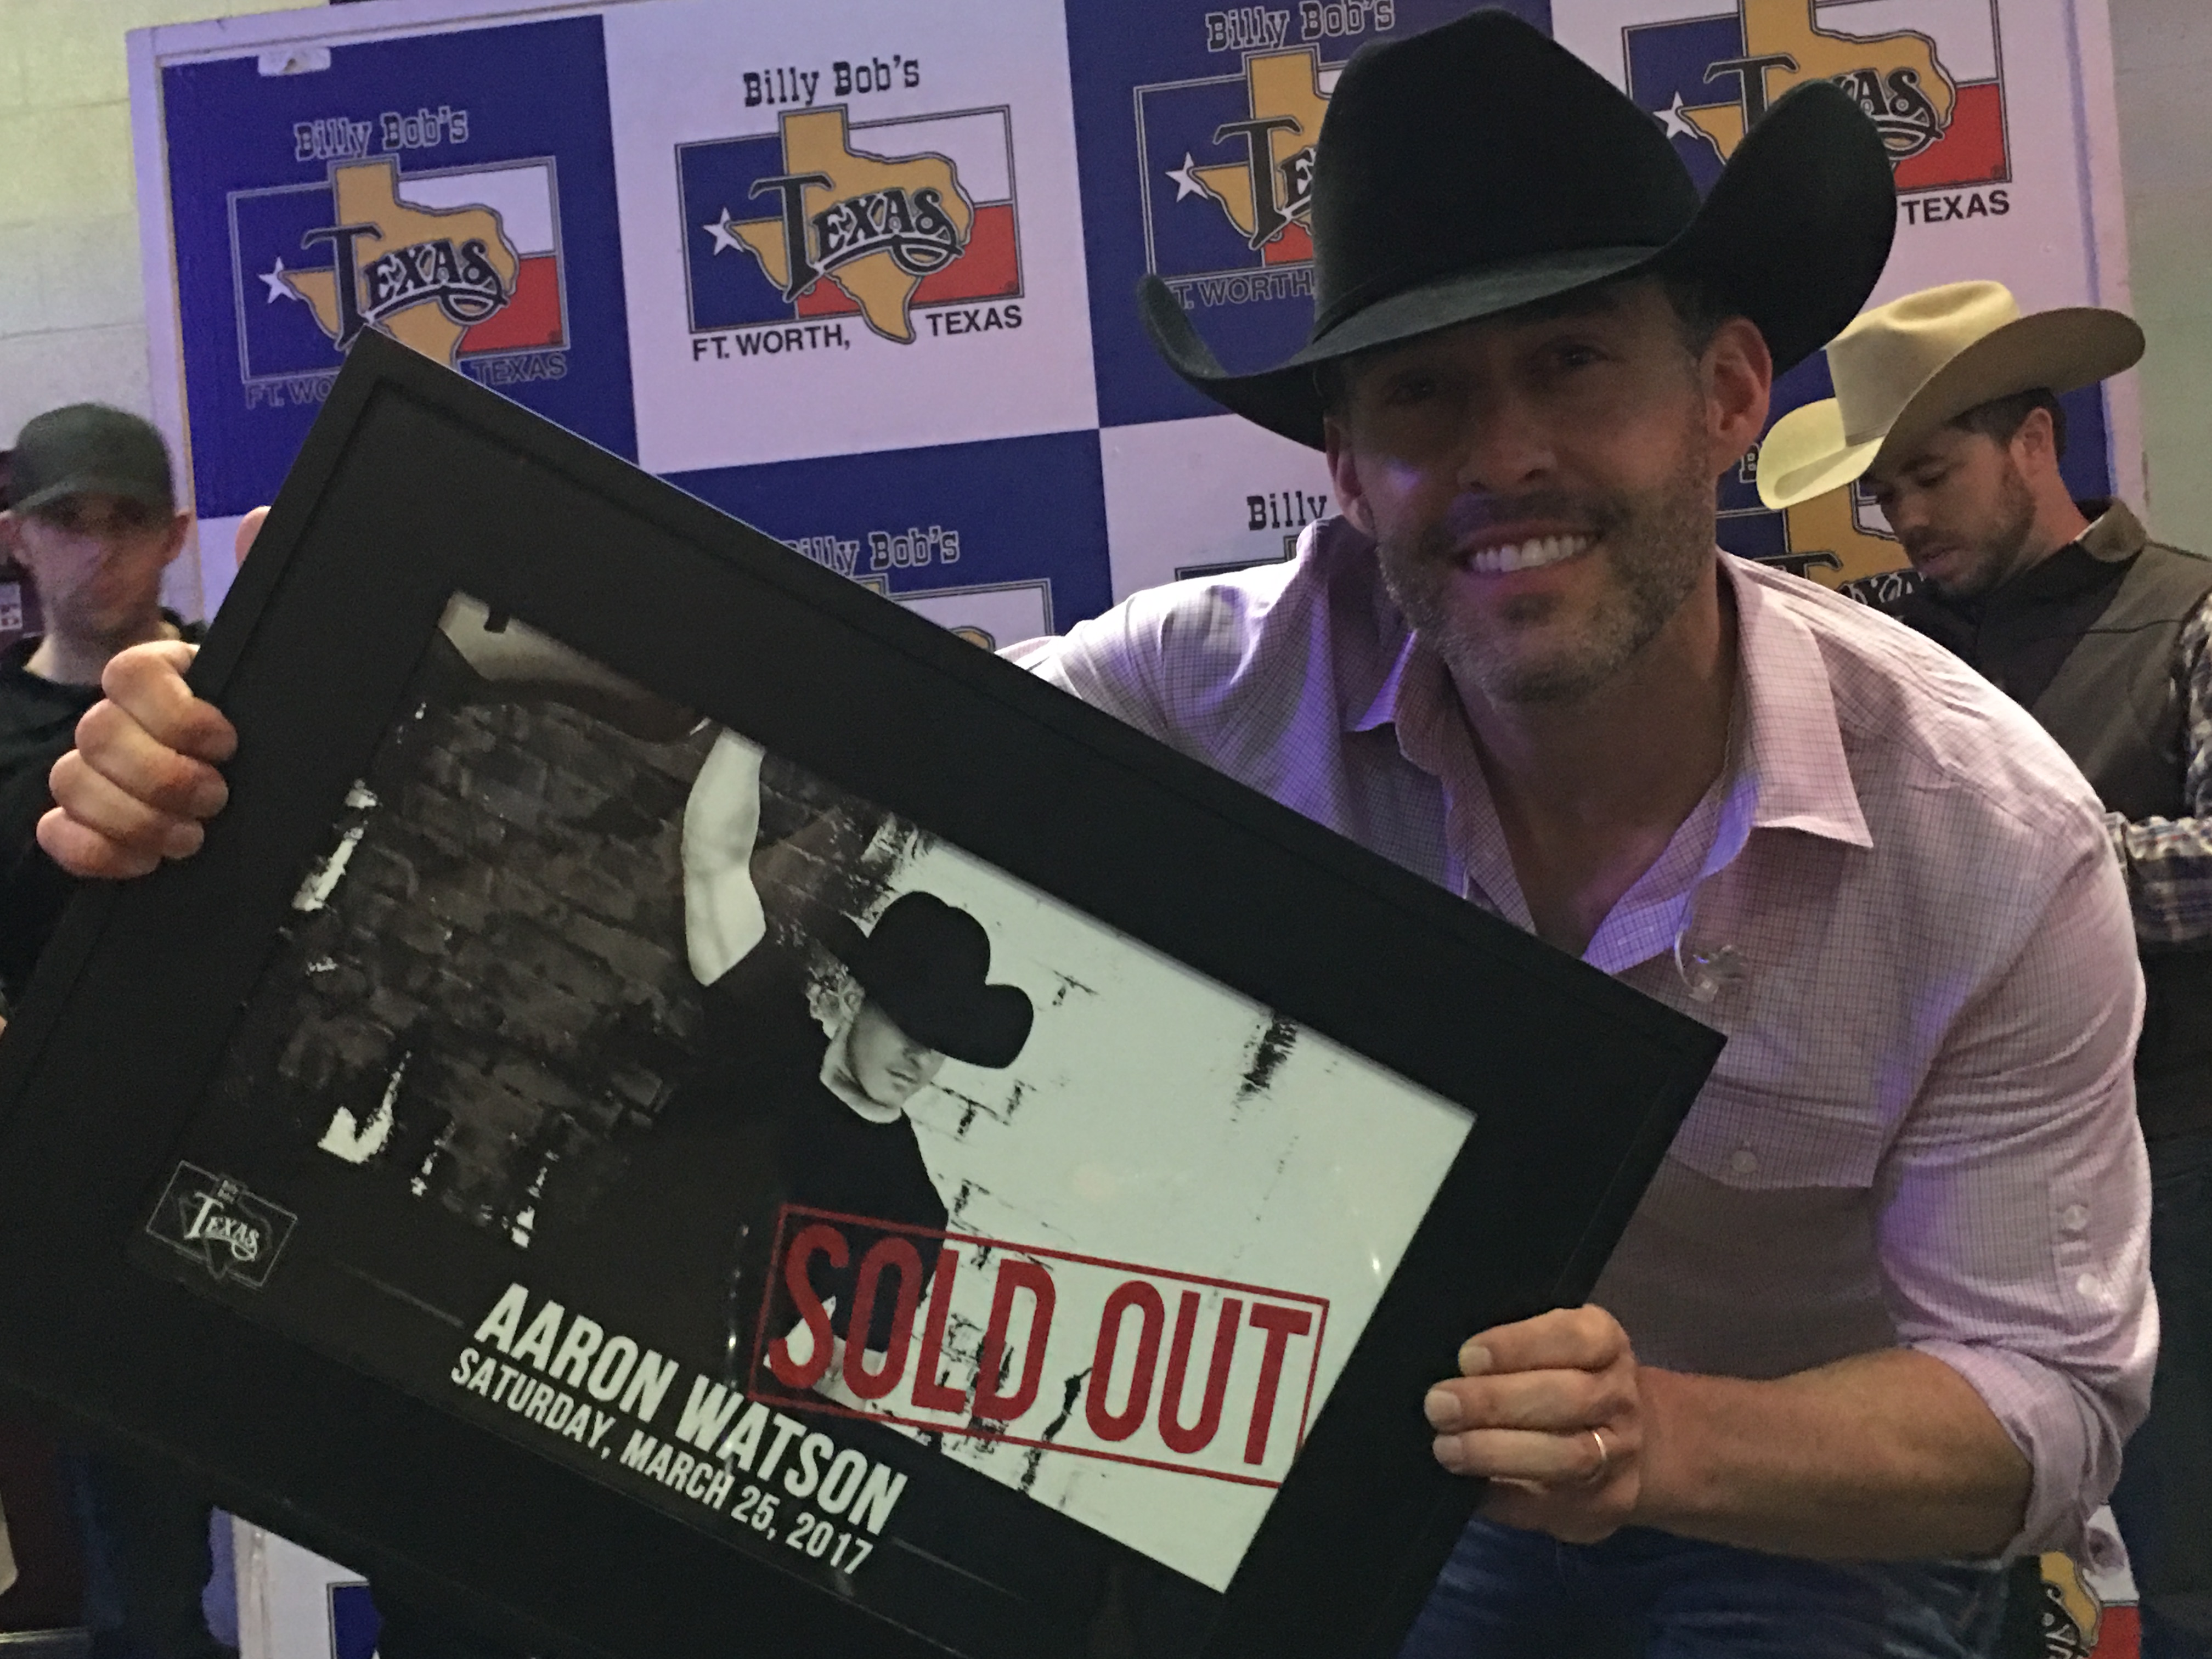 Aaron Watson: TWO historic achievements in one night at Billy Bobs Texas